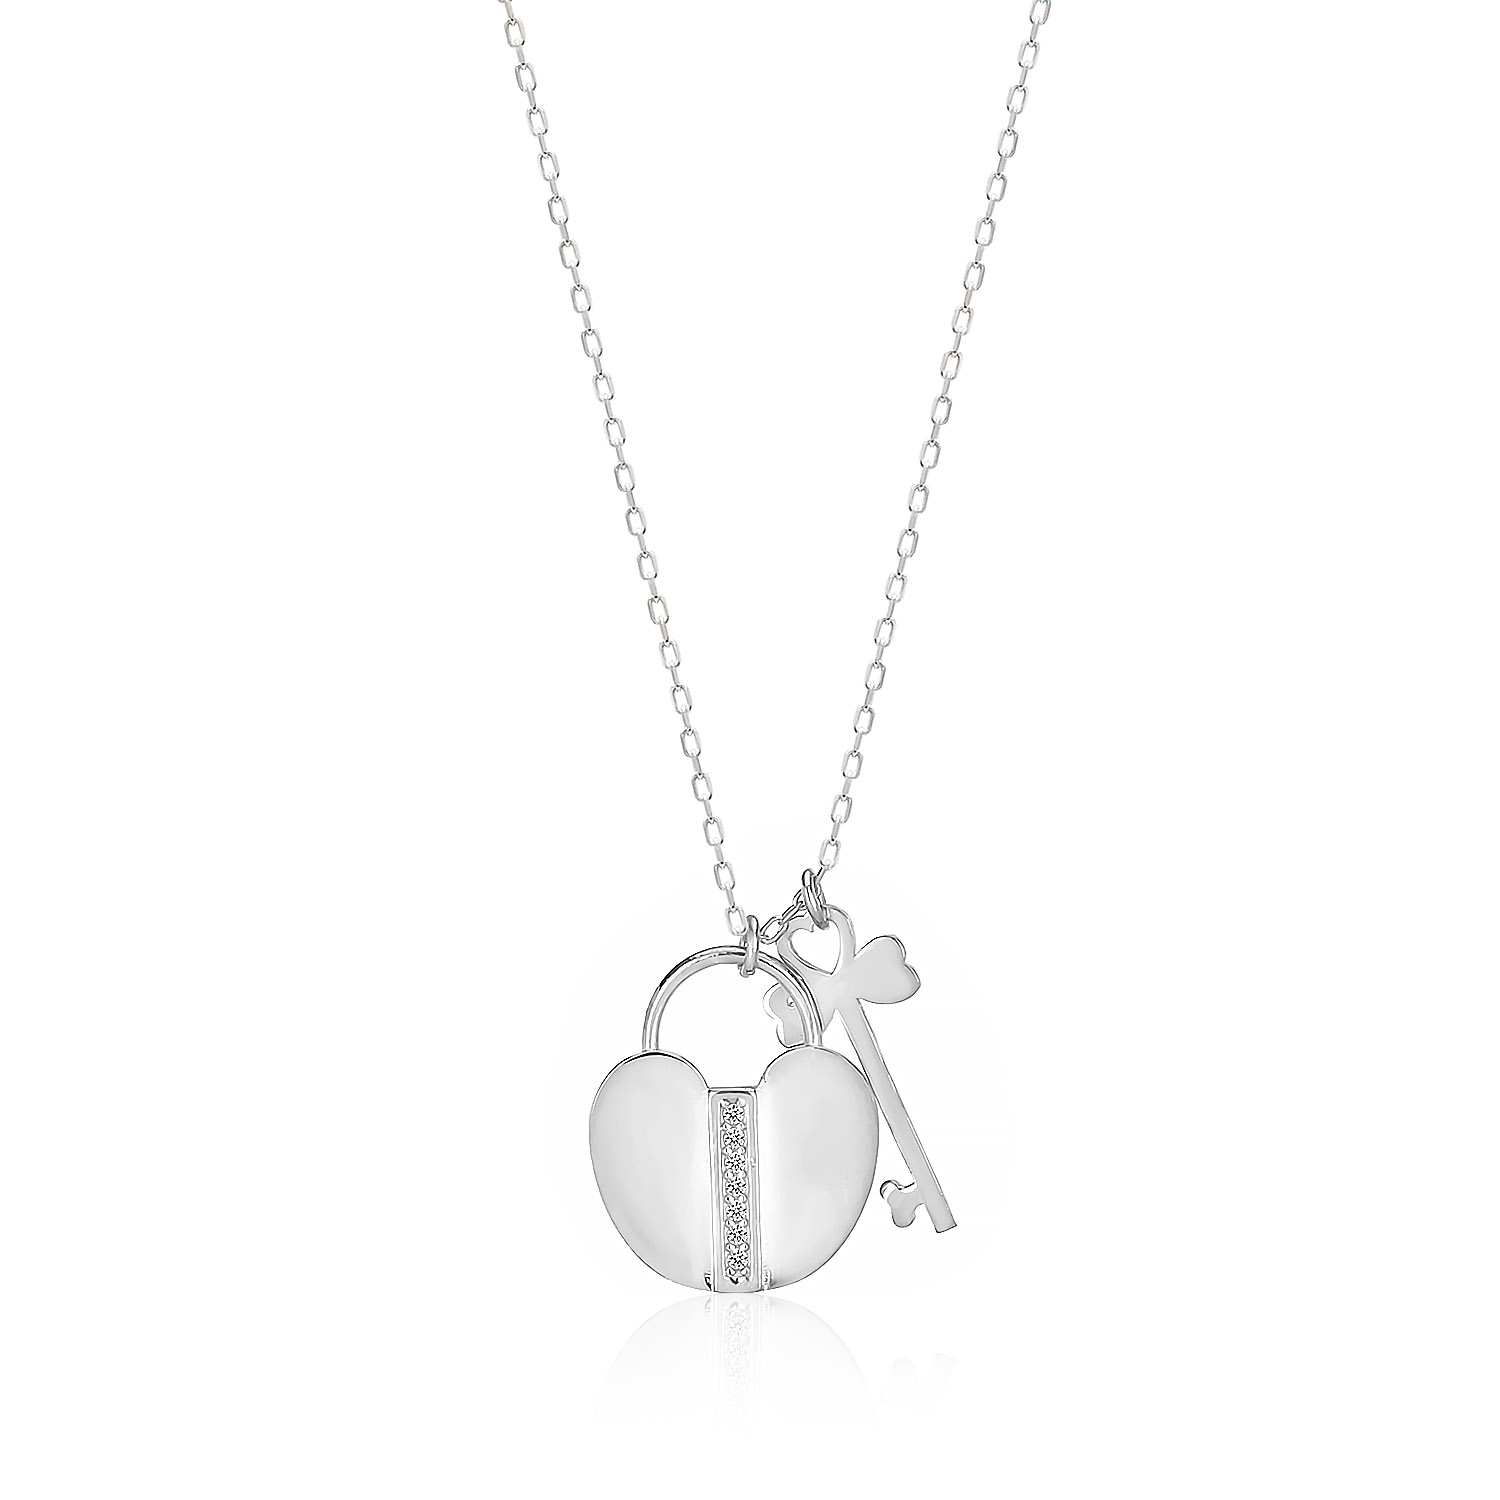 925-sterling-silver-lock-necklace-with-cubic-zirkon